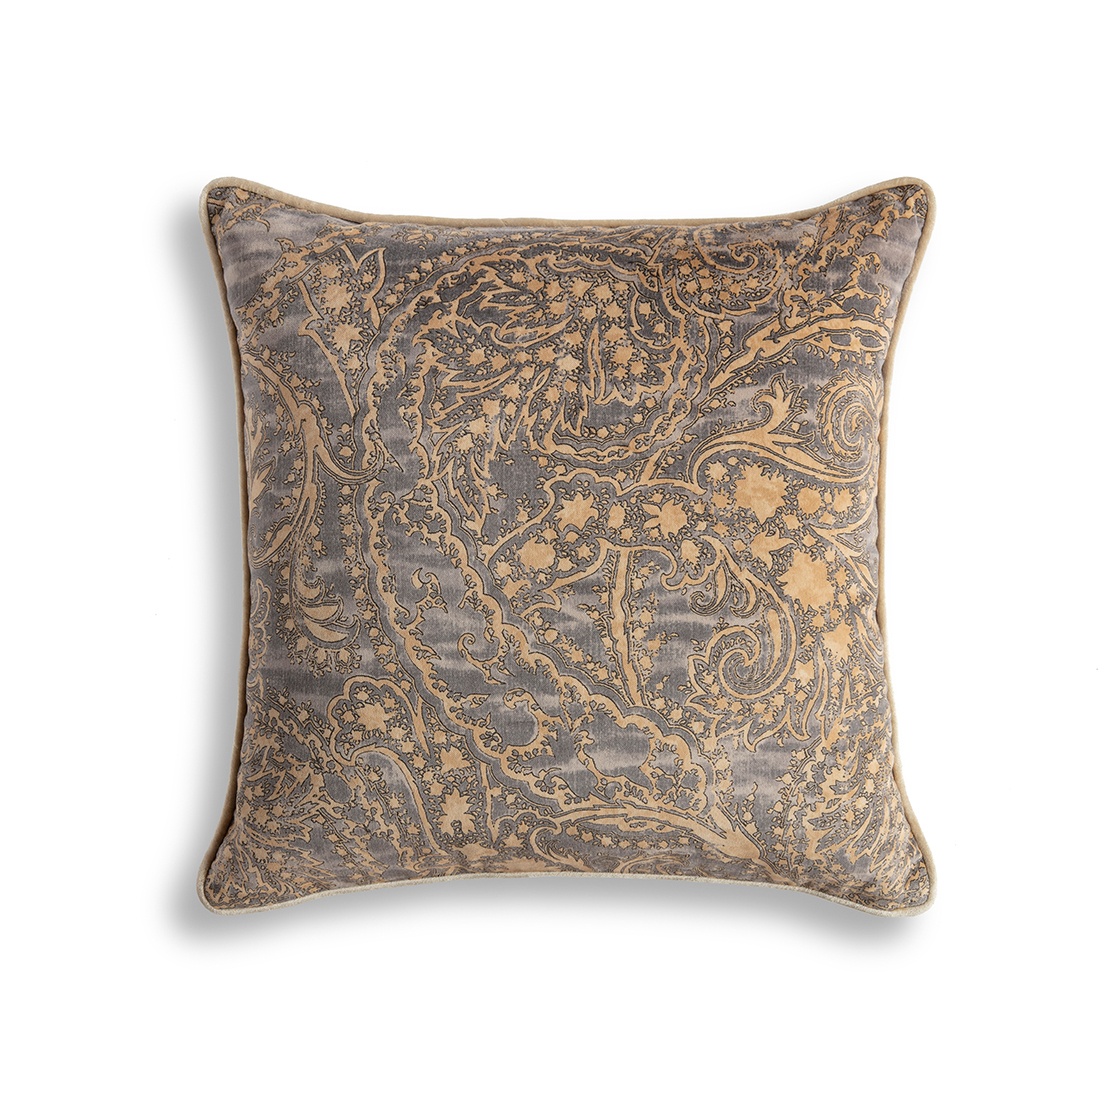 Balthazar cushion - Dusk with a Capri silk velvet back - Charcoal and piping in Stone - Beaumont & Fletcher